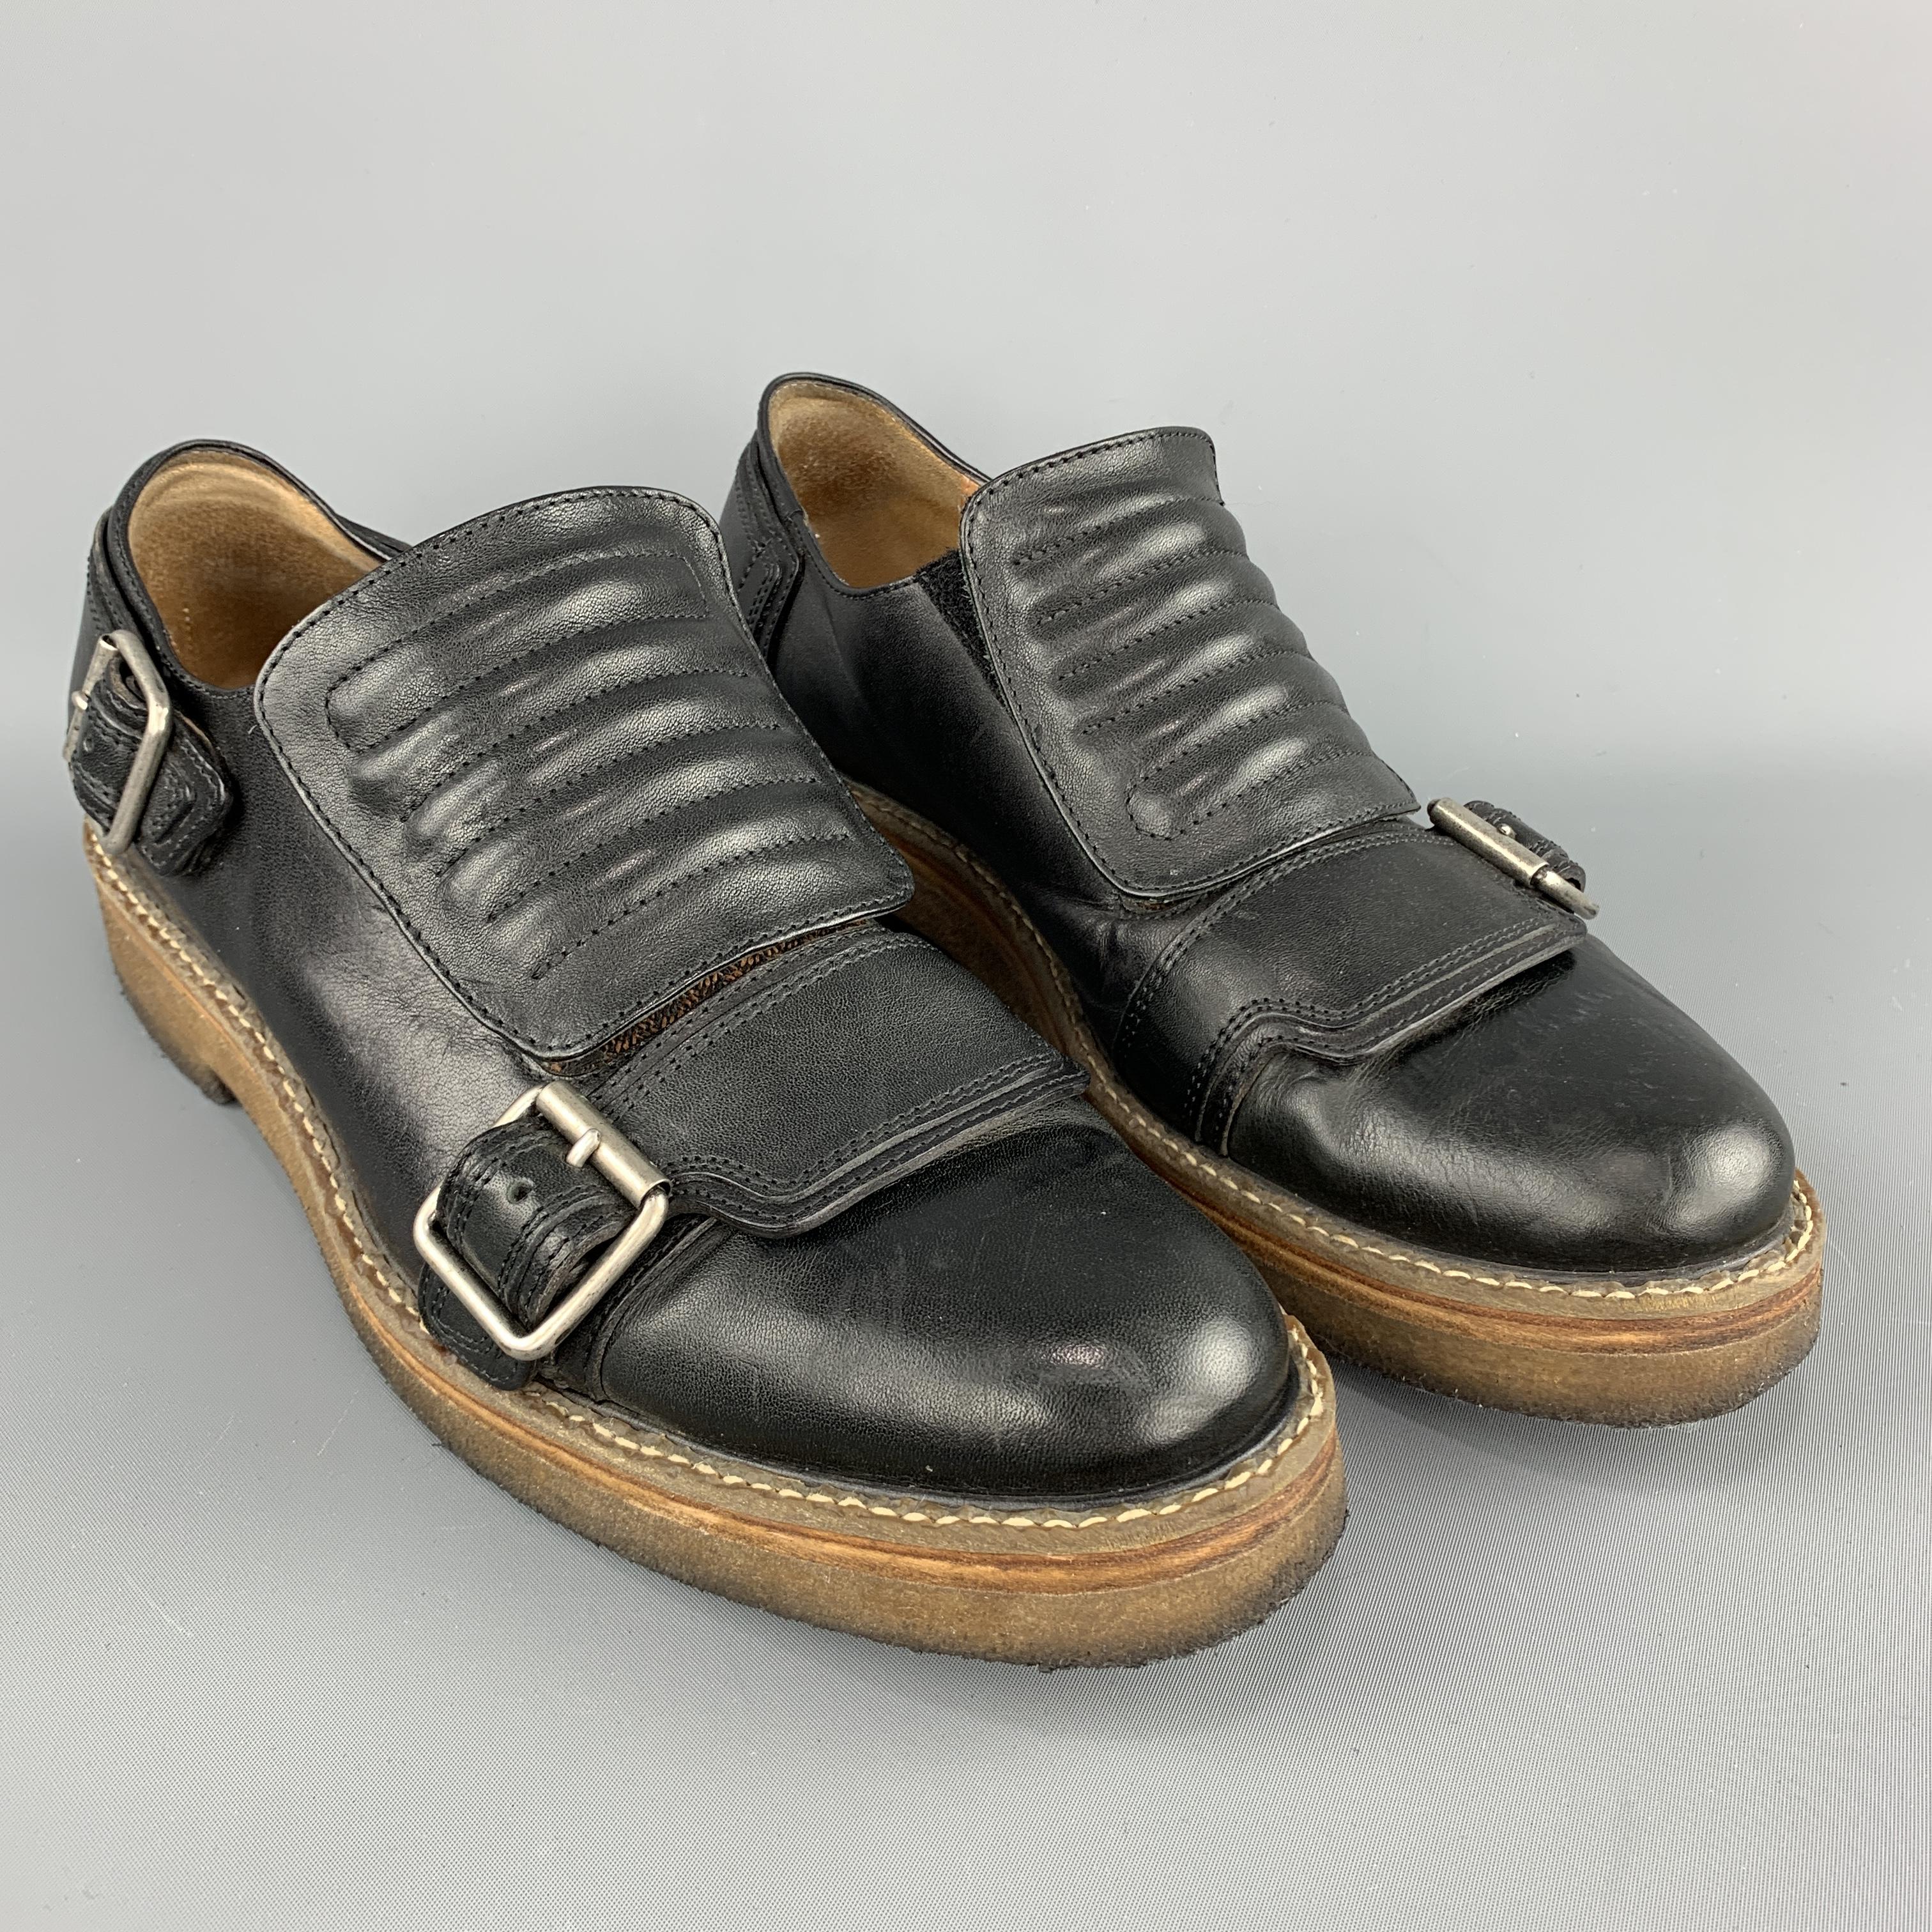 DRIES VAN NOTEN loafers come in black leather with silver tone buckle strap details, thick quilted strap closure, and tan crepe sole. Made in Italy.  Retails at $945

Good Pre-Owned Condition.
Marked: IT 41

Outsole: 12 x 4.25 in.